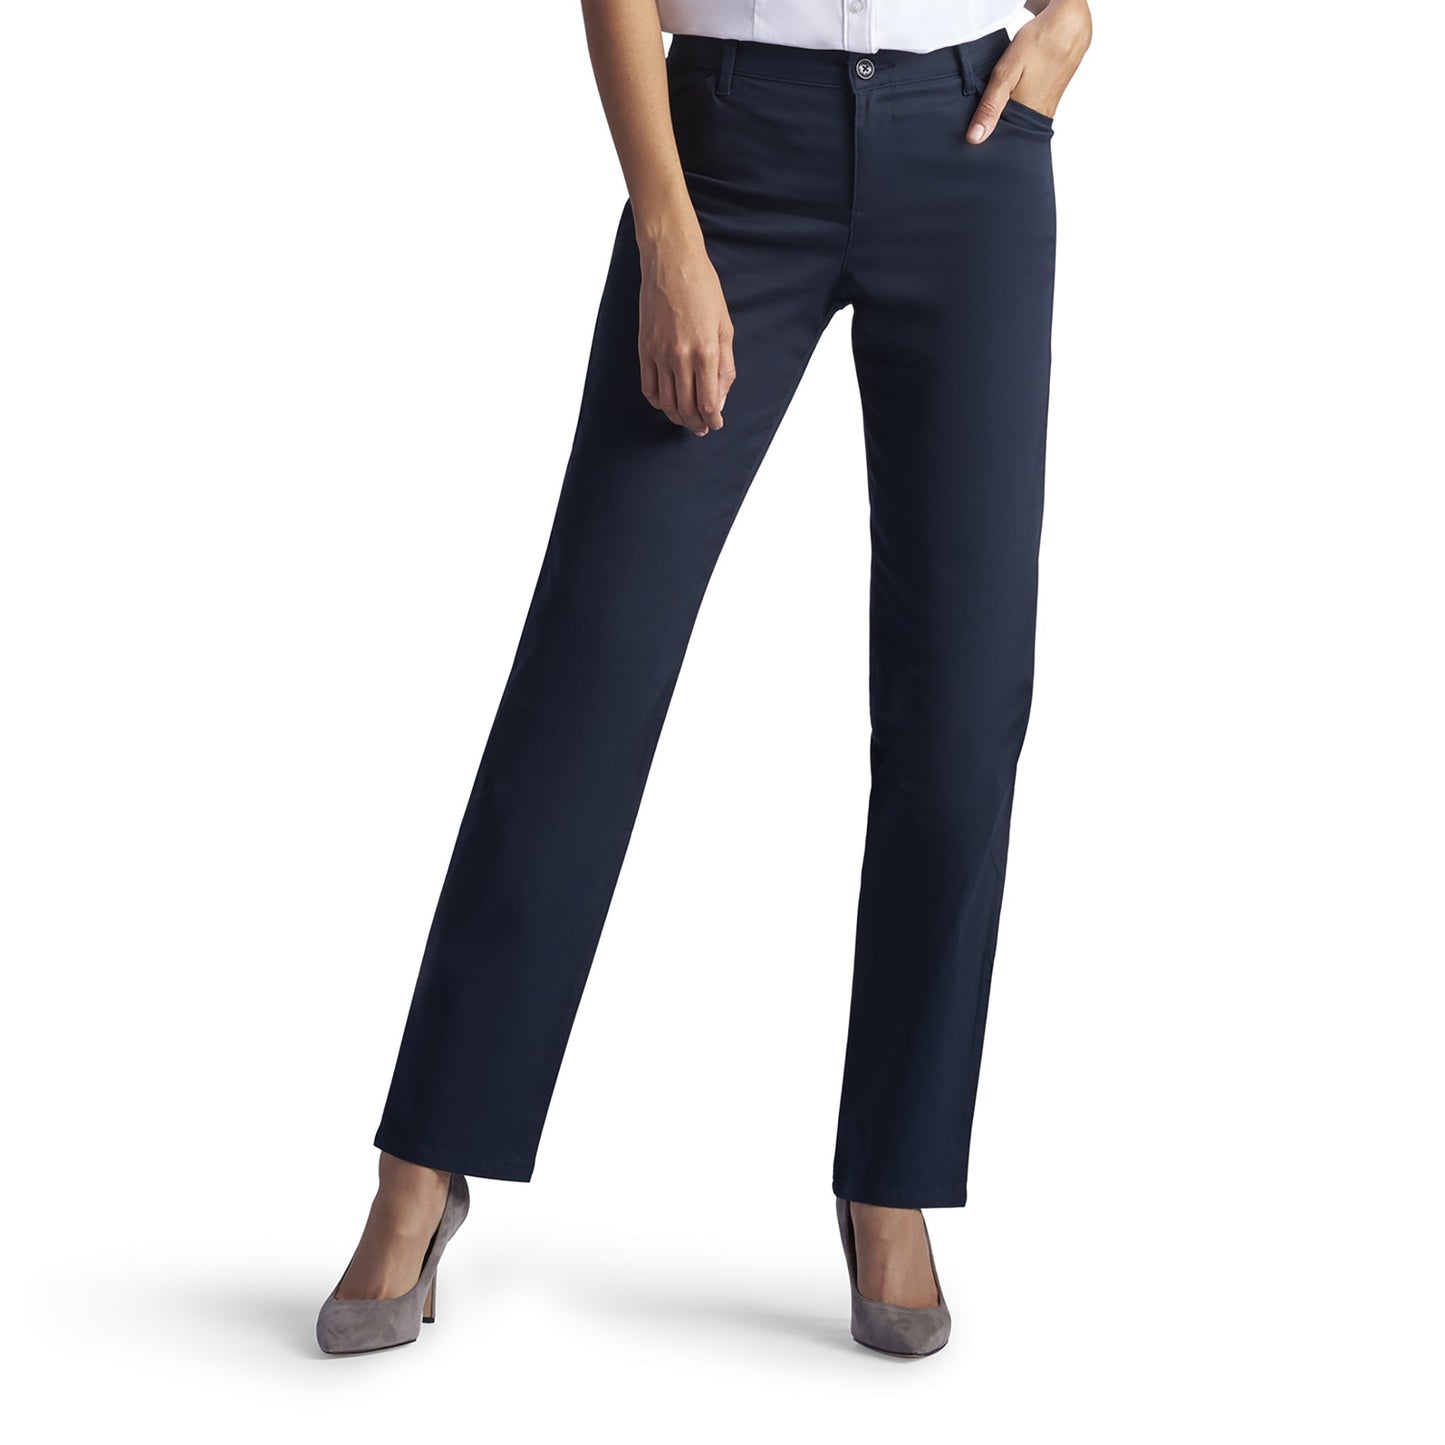 Lee Women's Relaxed Fit All Day Straight Leg Pant Imperial Blue 8 Long